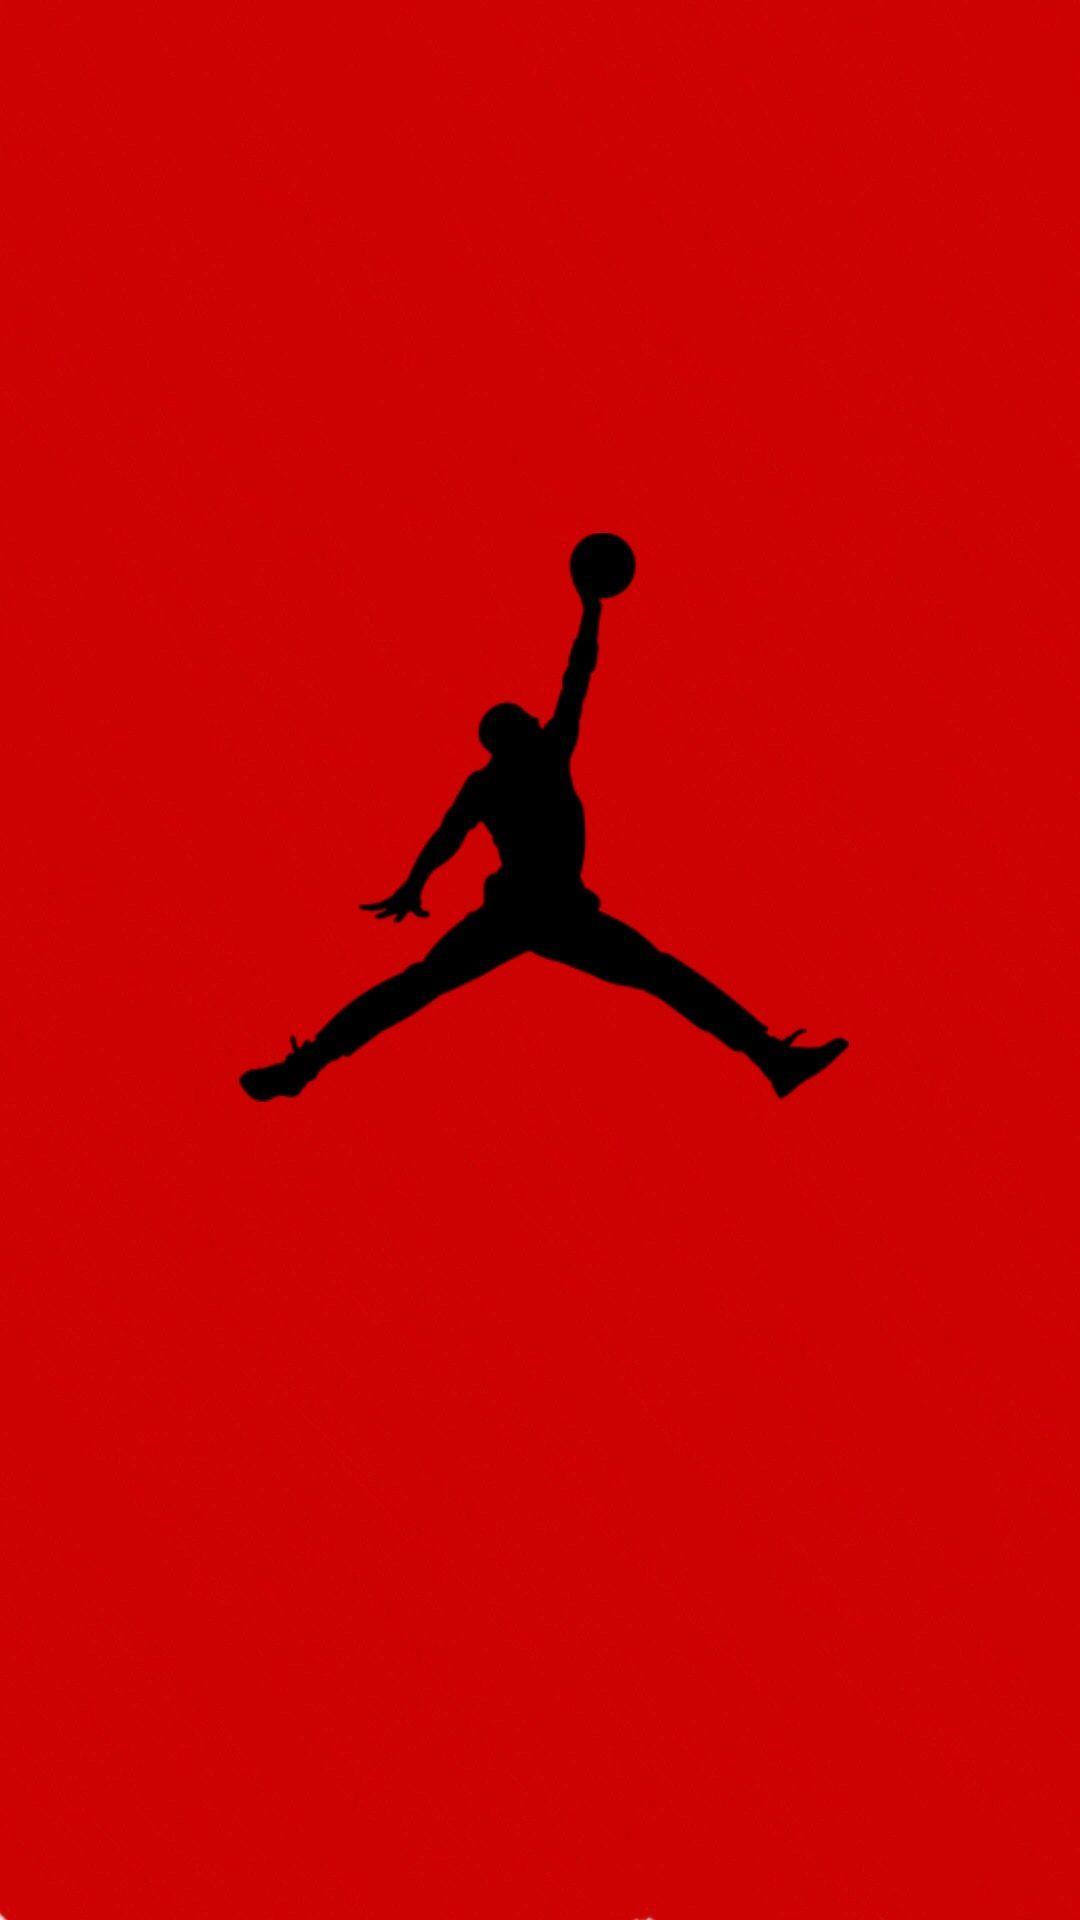 Air jordan logo iphone background. Background for iphone